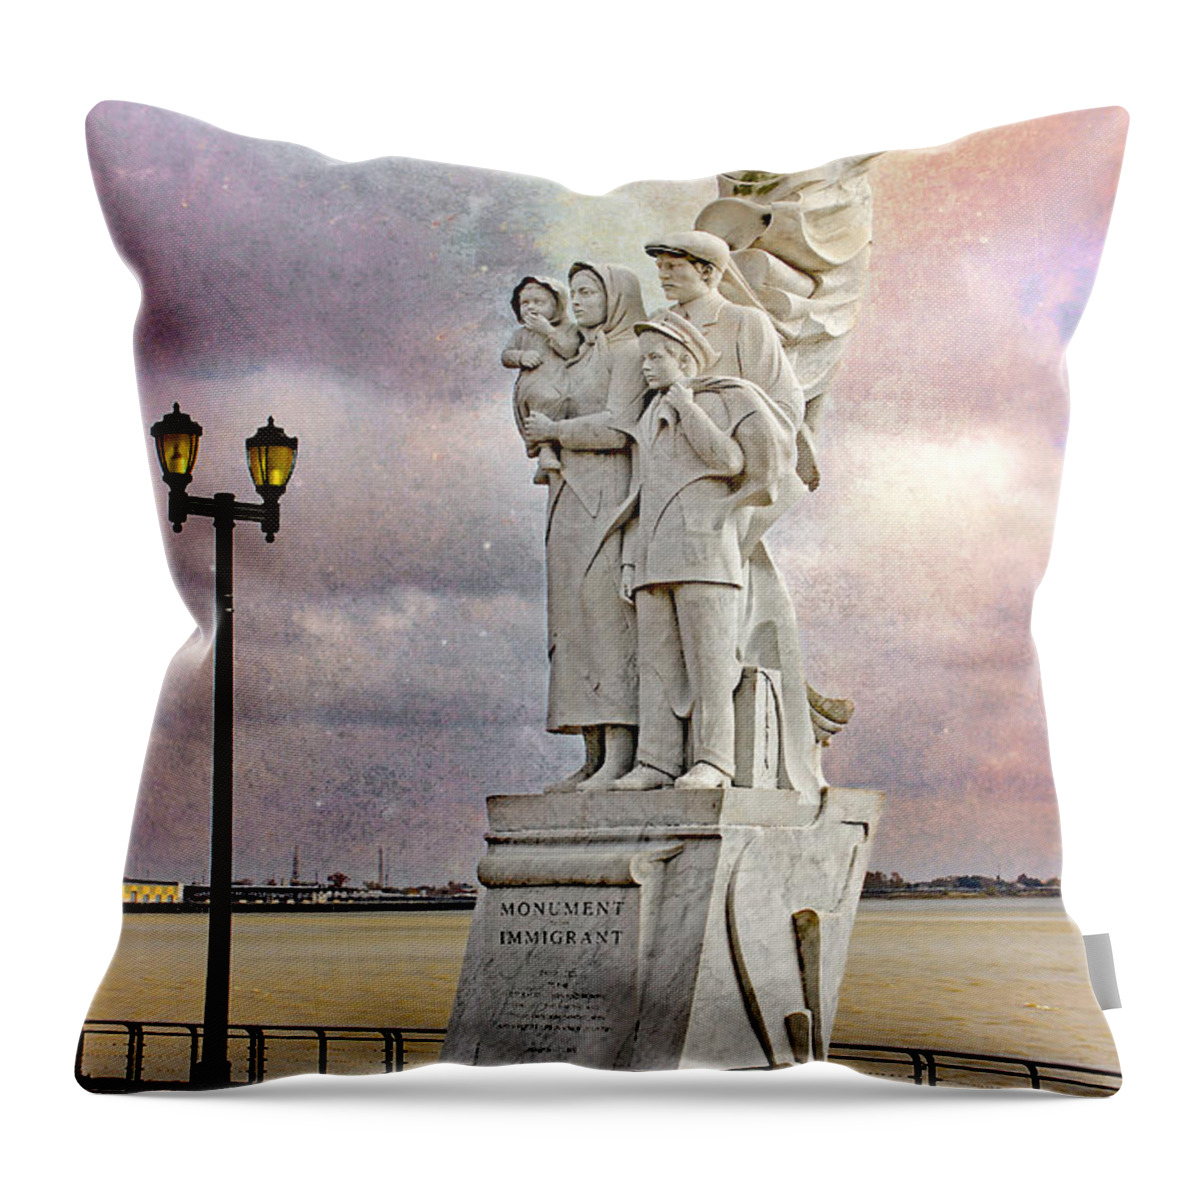 Monument To The Immigrant Throw Pillow featuring the photograph Monument To The Immigrant by Iryna Goodall